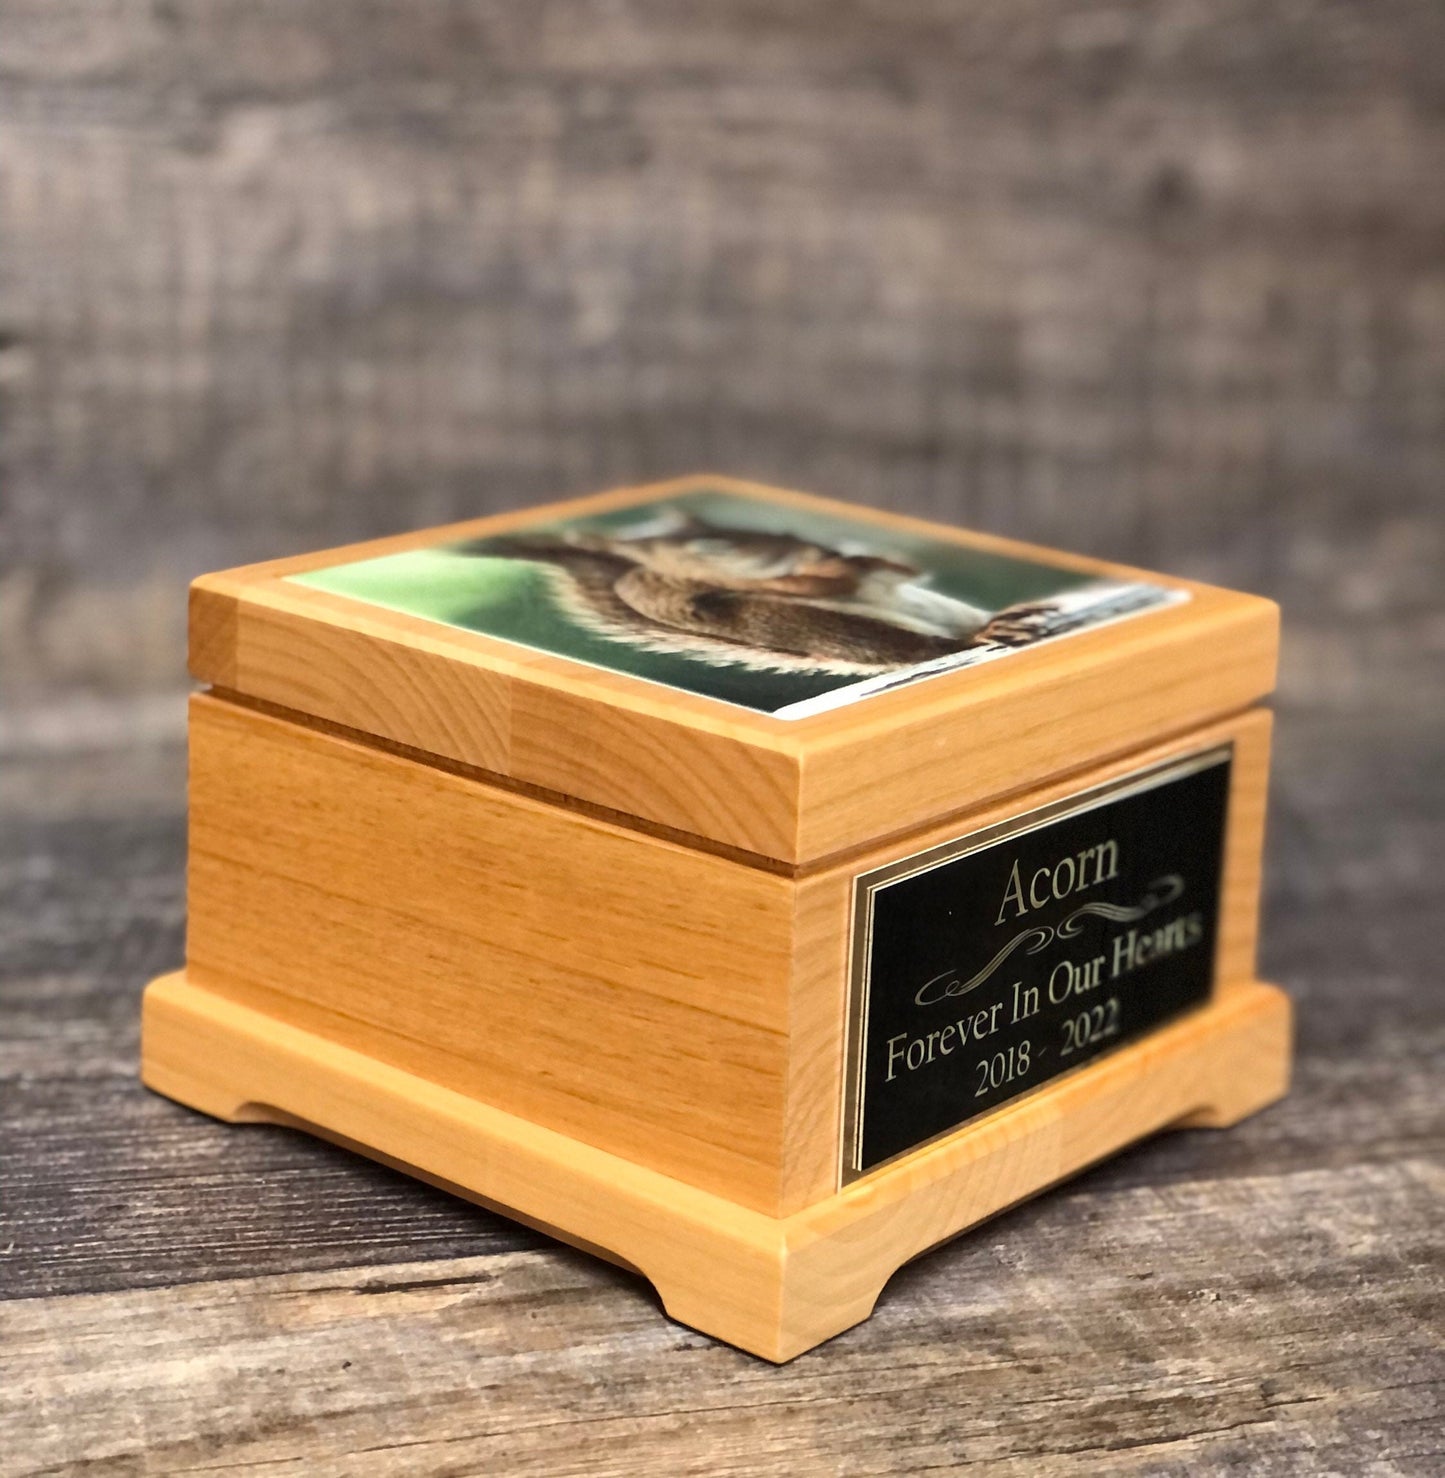 Squirrel Urn Small Animal Pet Urn Rodent Mouse Urn Pet Memorial Keepsake Box Cremation Urn Custom Photo Tile & Engraved Tag To 25lbs